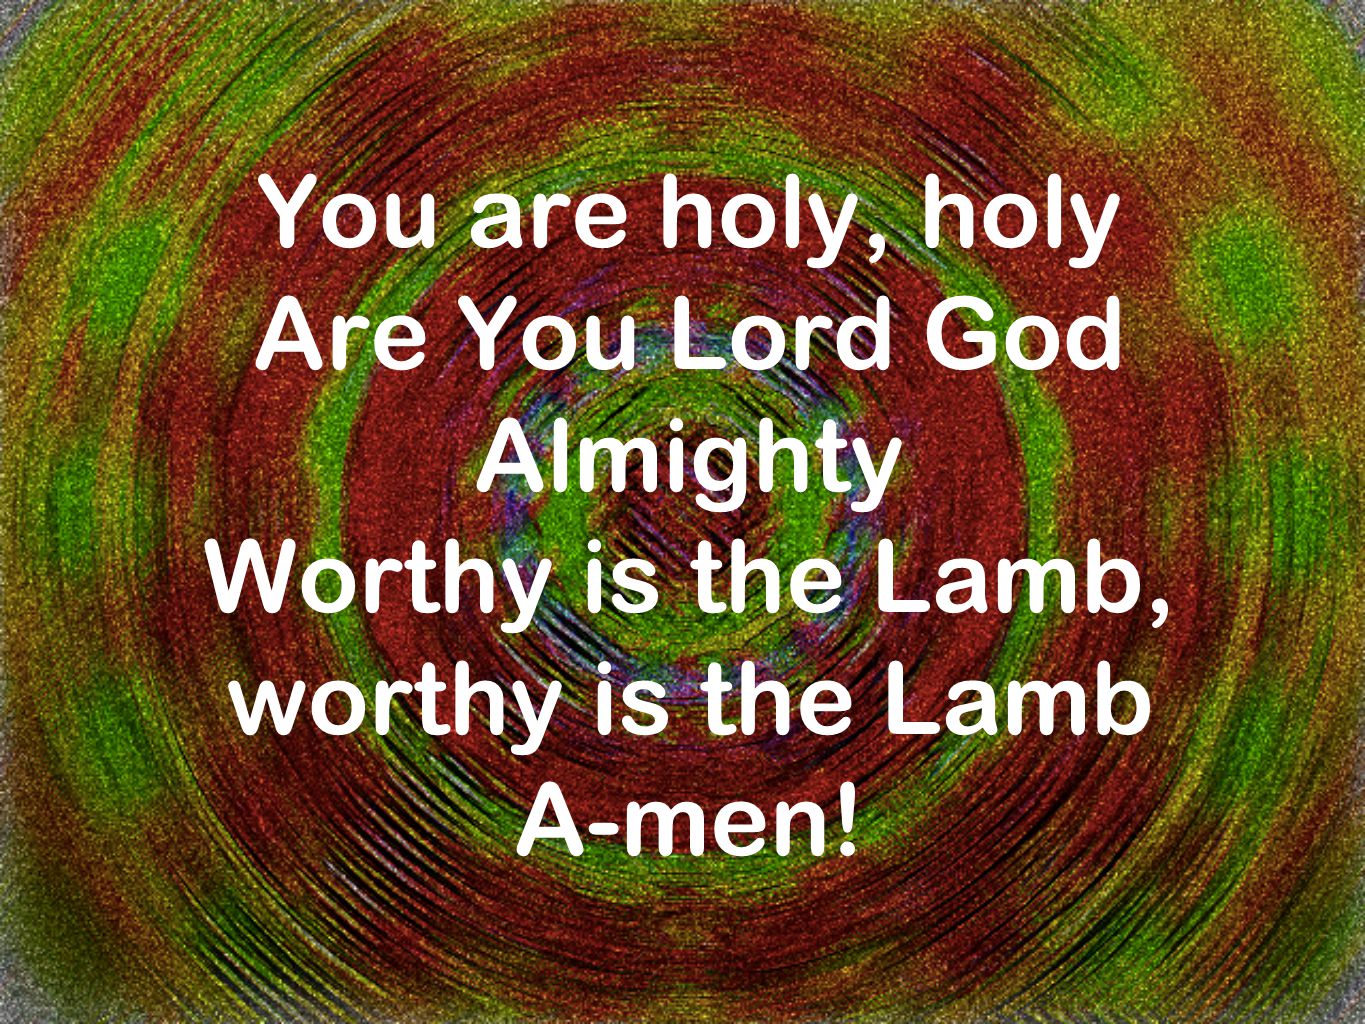 You are holy, holy Are You Lord God Almighty Worthy is the Lamb, worthy is the Lamb A-men!